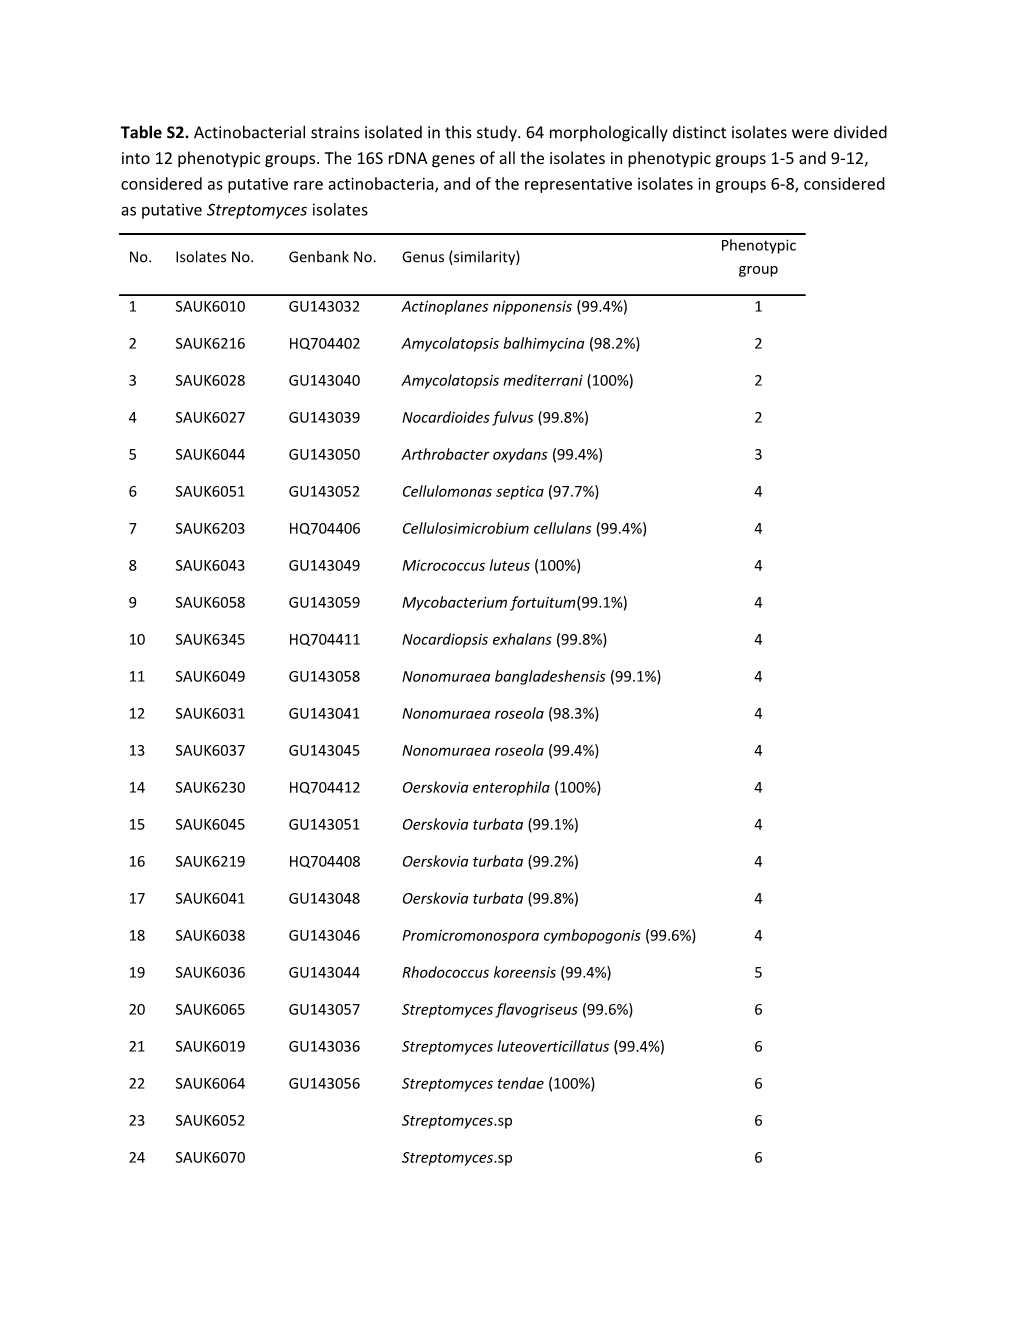 Table S2. Actinobacterial Strains Isolated in This Study. 64 Morphologically Distinct Isolates